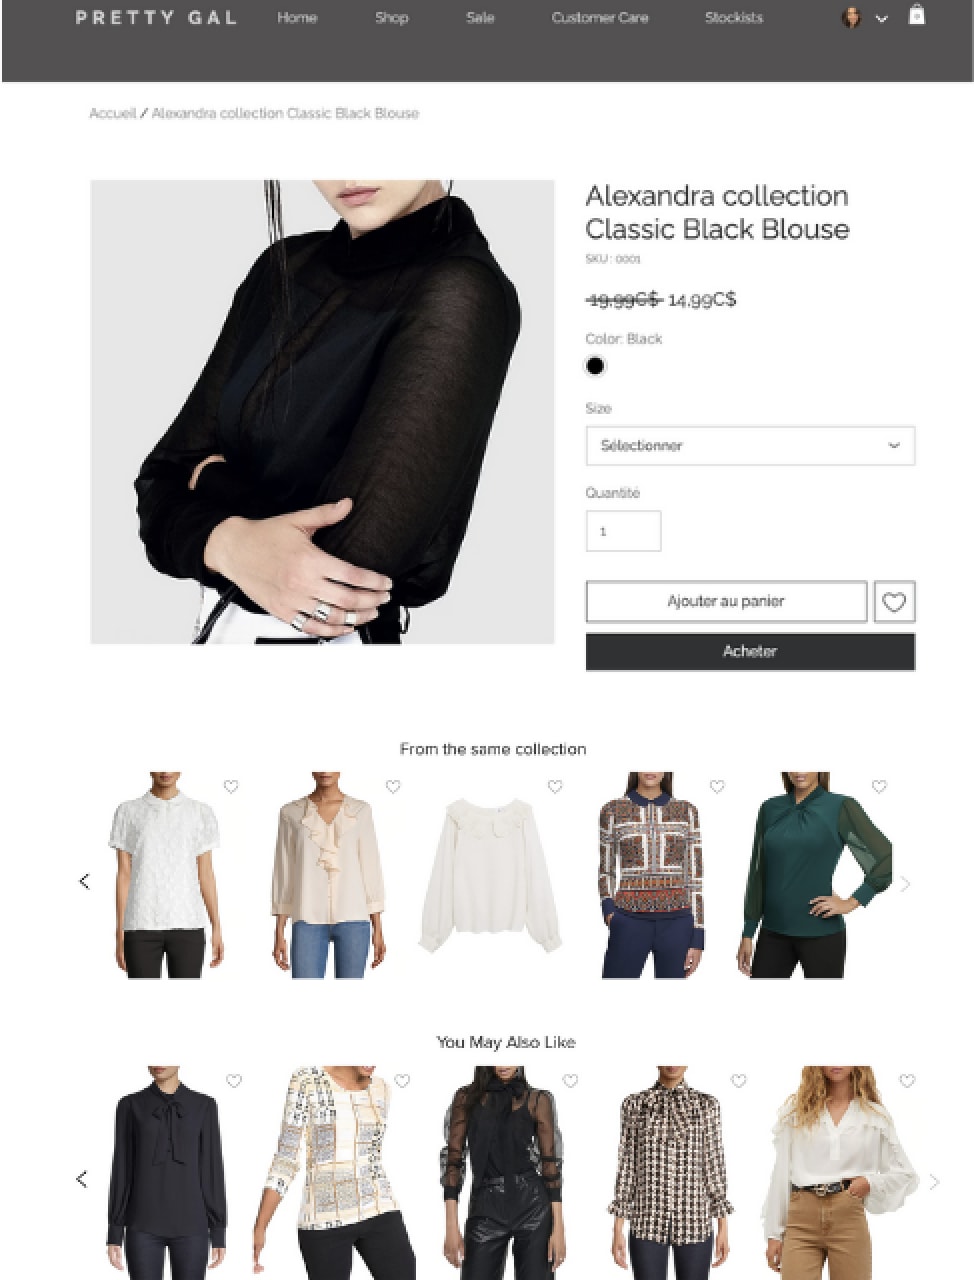 Product recommendations example on product detail pages